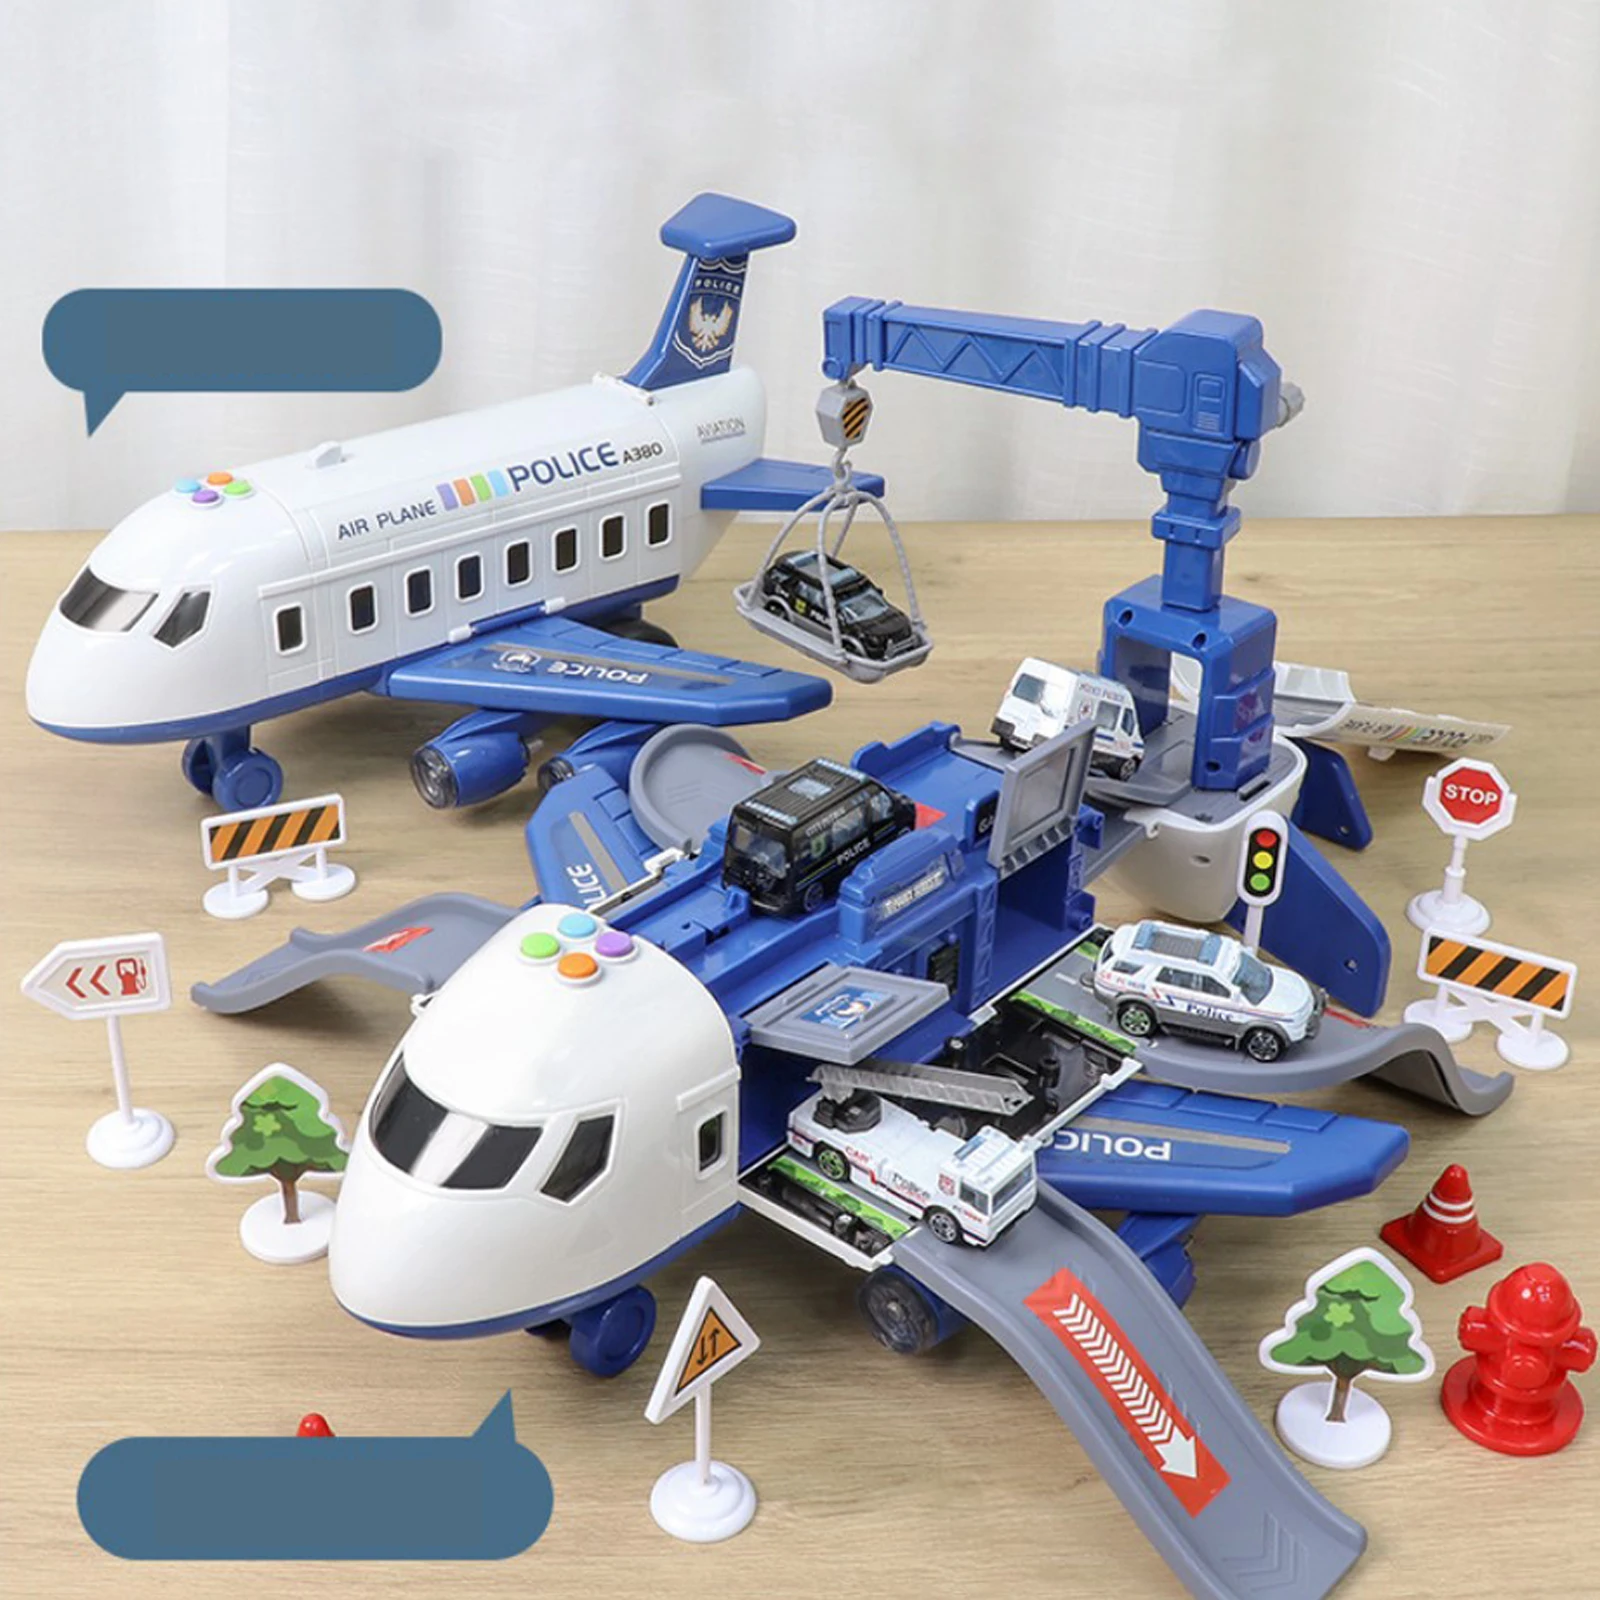 Airplane Toy, Kids Airplane Toys for 3 4 5 6 Year Old Boys Girls Toddlers, Aircraft Vehicle Play Set with 4 Vehicles 5